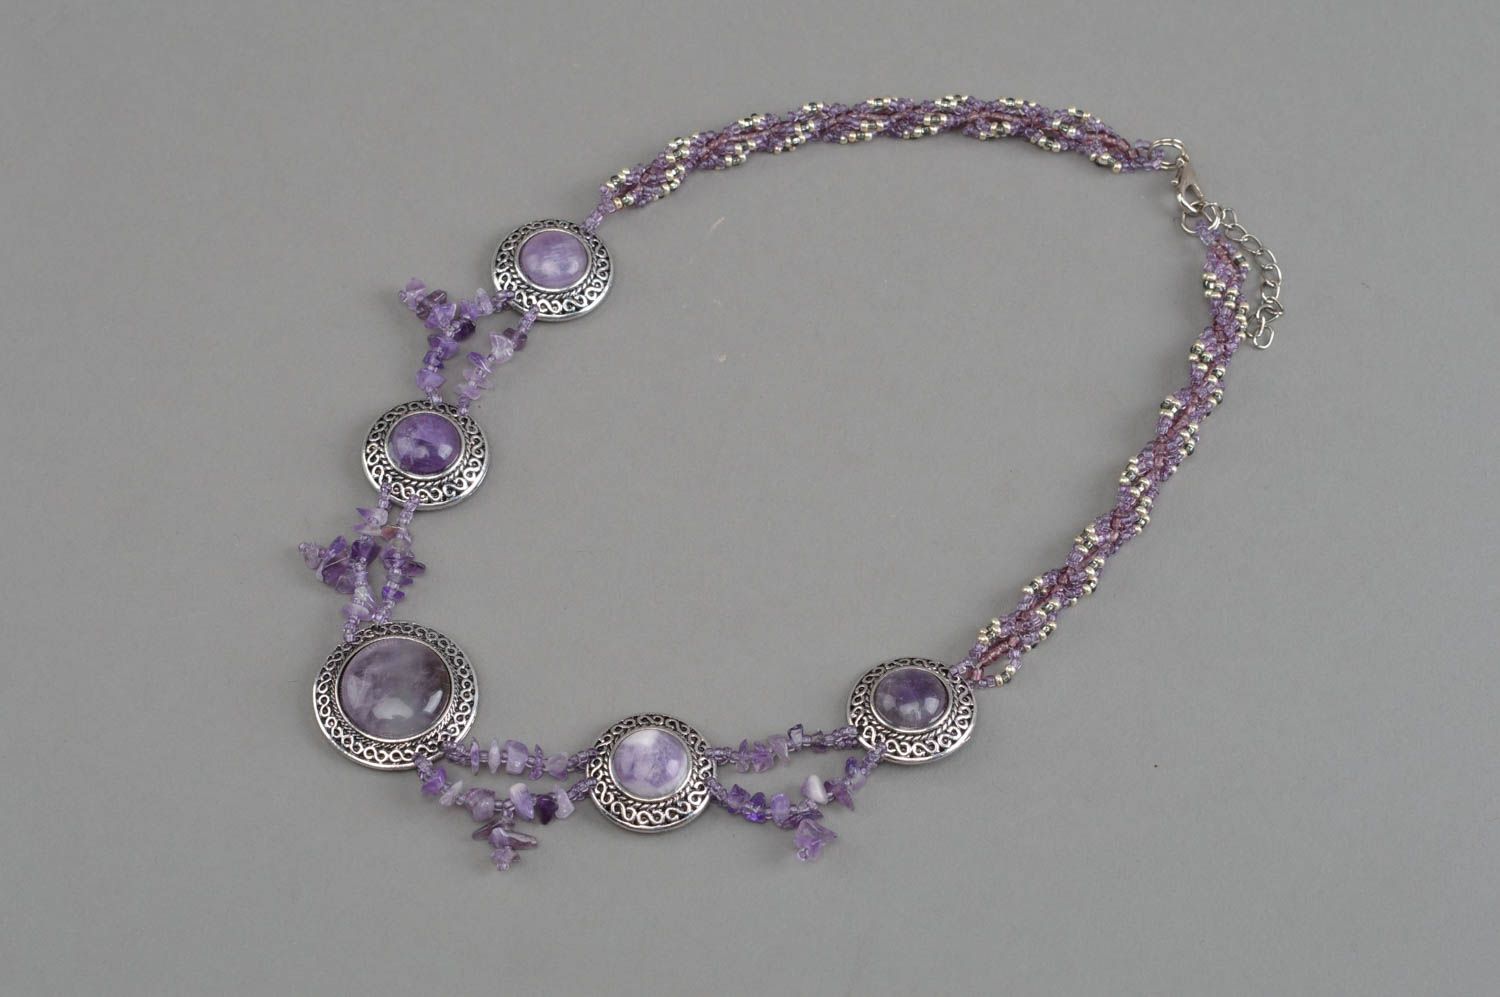 Unusual beautiful necklace with amethyst beaded jewelry stylish accessory photo 2